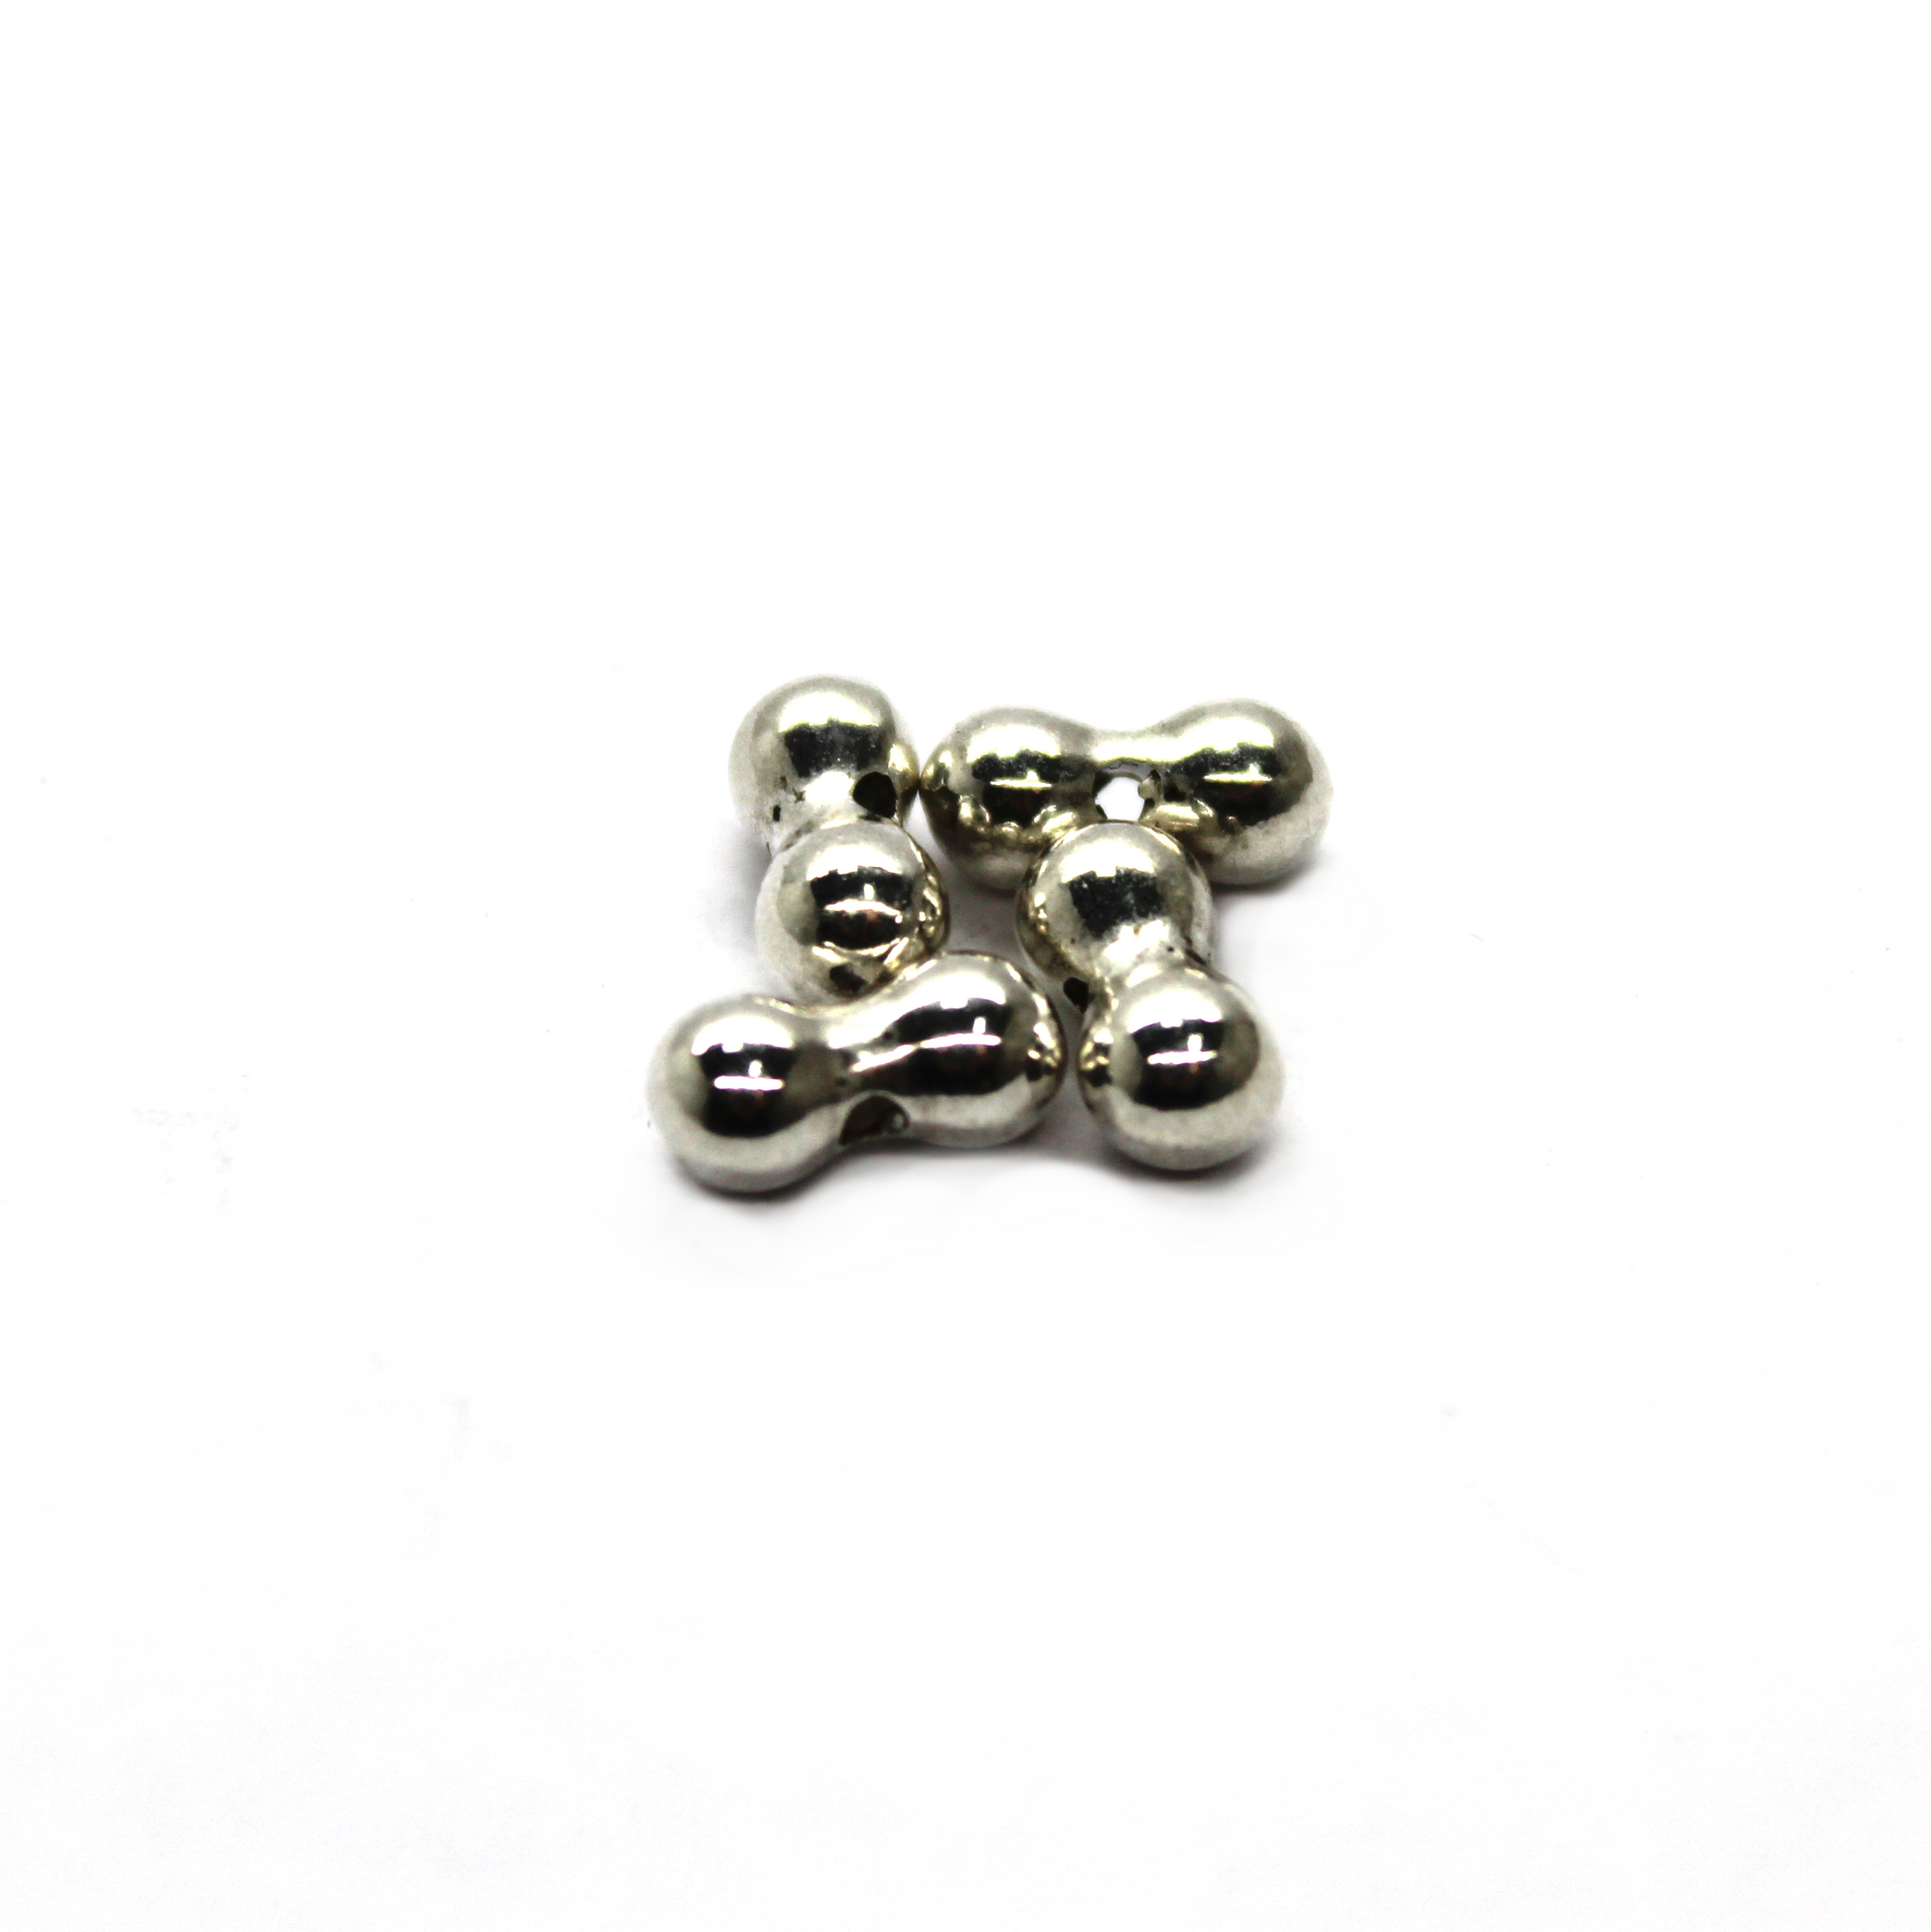 Spacer, Curvy, Silver, Alloy, Round, 9mm x 4mm, Sold Per pkg of 19